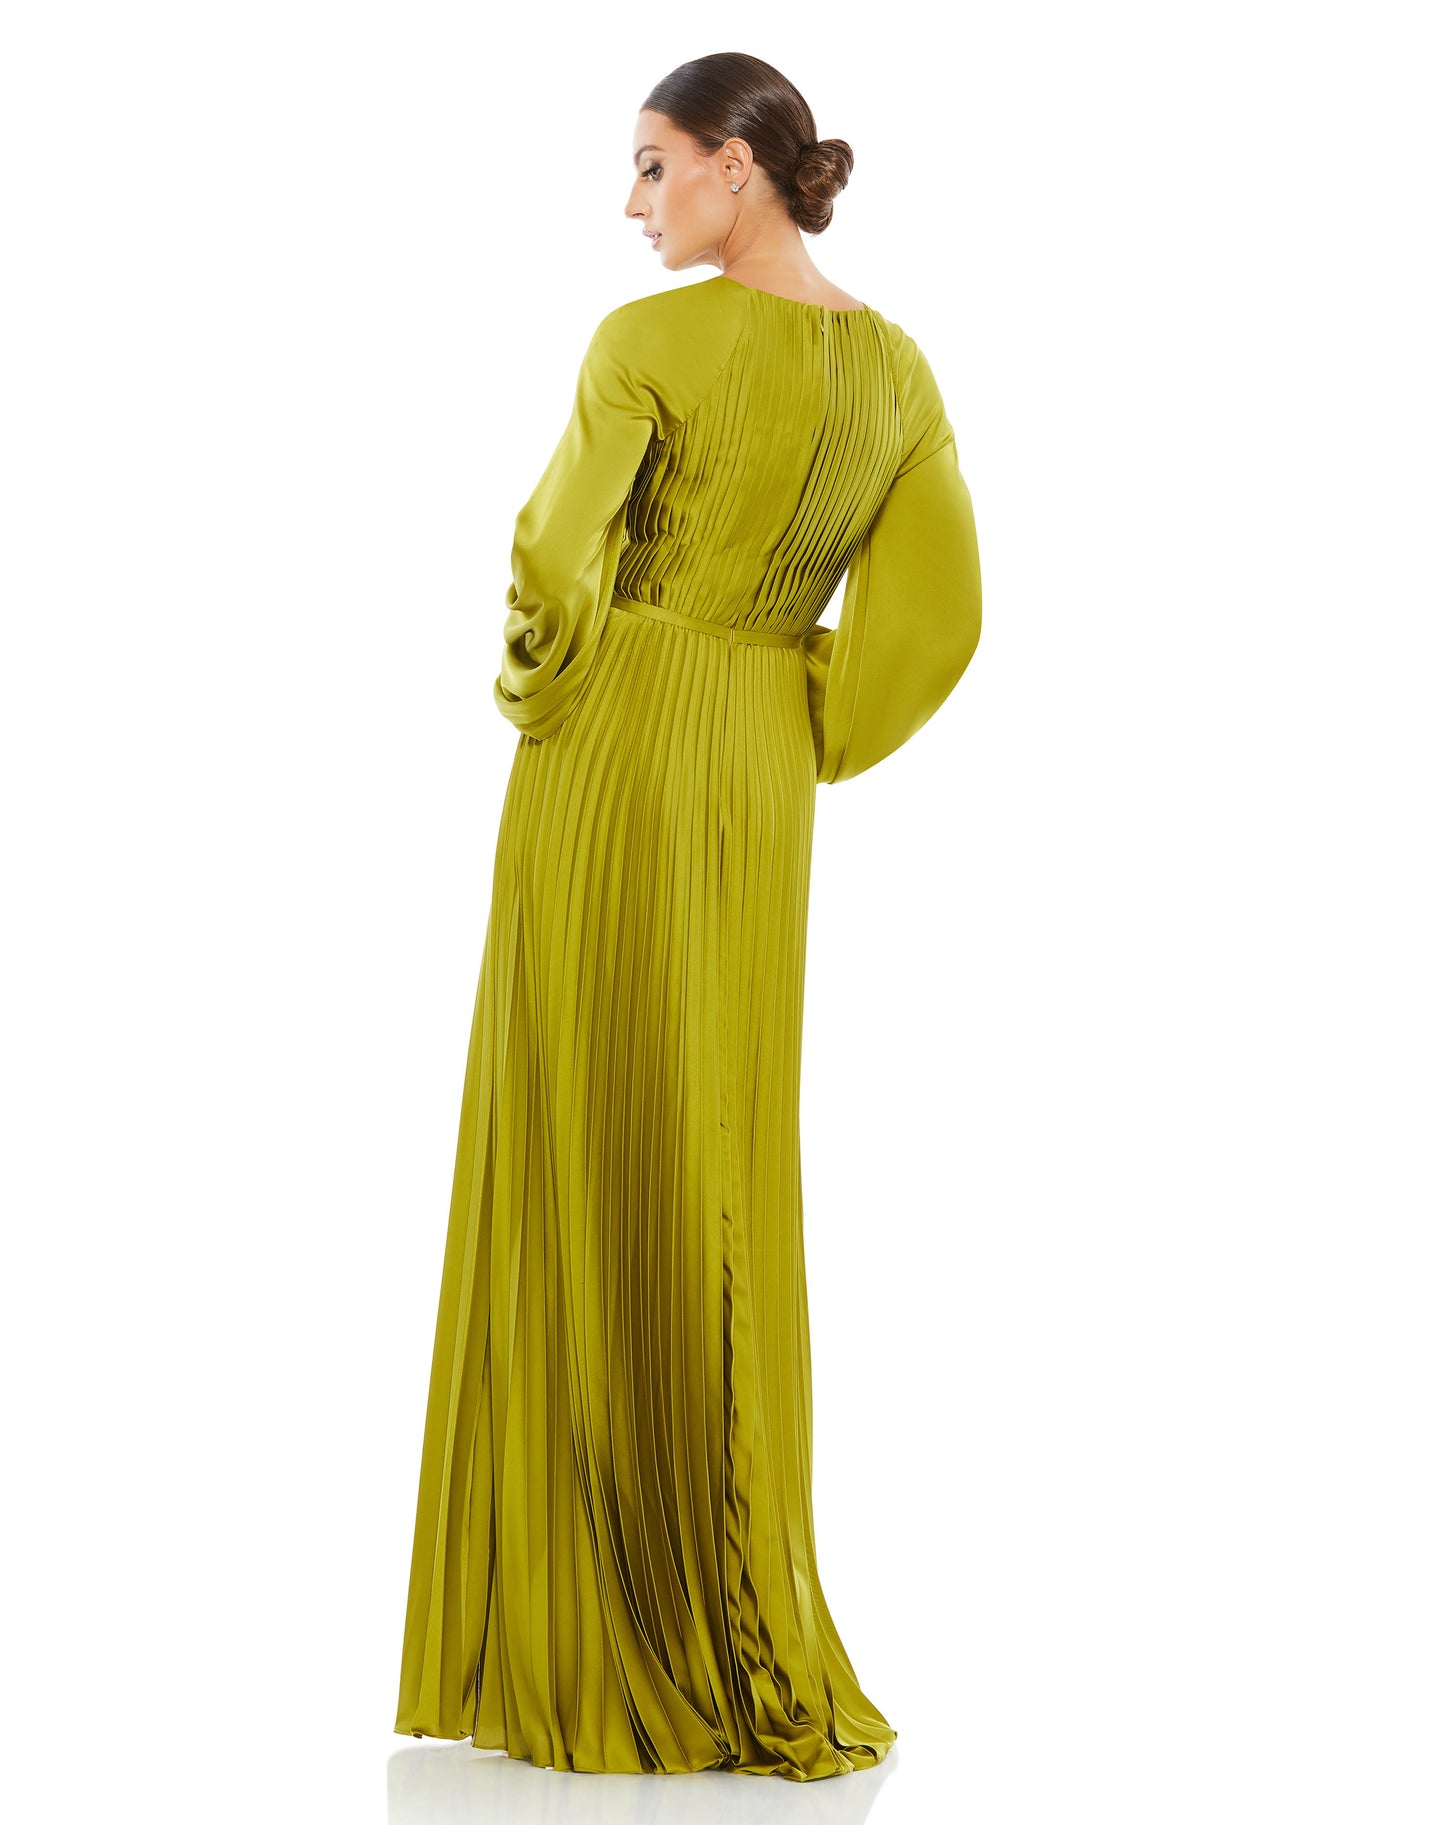 Long sleeve pleated gown with a high neckline, blouson sleeves, pleated bodice and skirt, and a thigh-high slit. Ieena for Mac Duggal 100% Polyester Back Zipper Full Length Long Sleeves Thigh-High Slit Style #26590